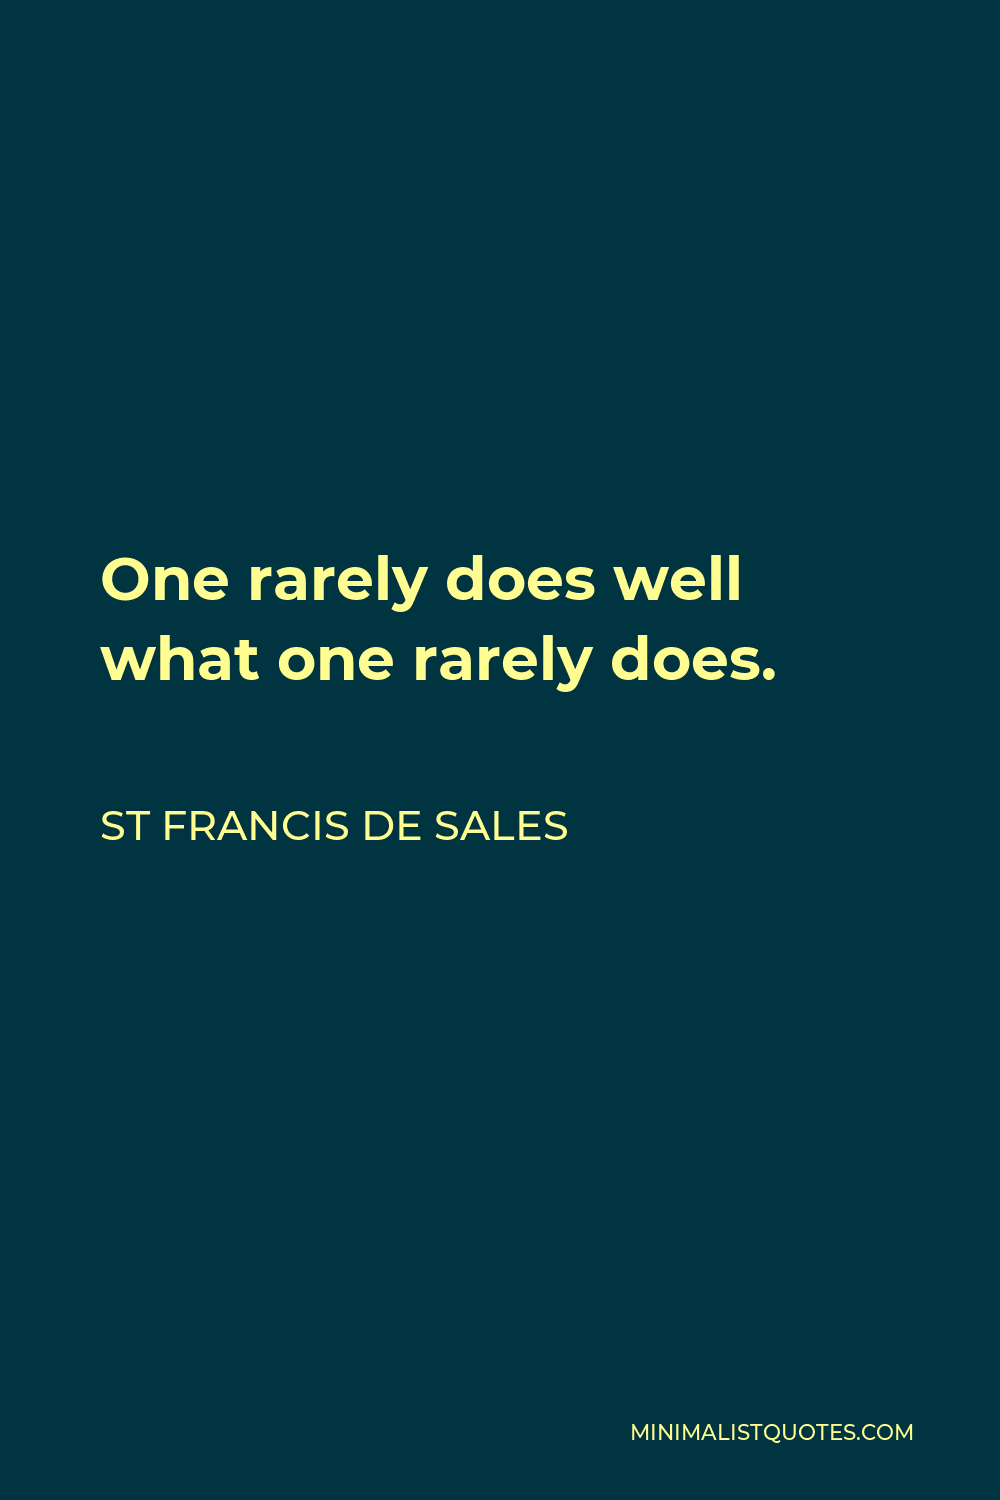 St Francis De Sales Quote - One rarely does well what one rarely does.